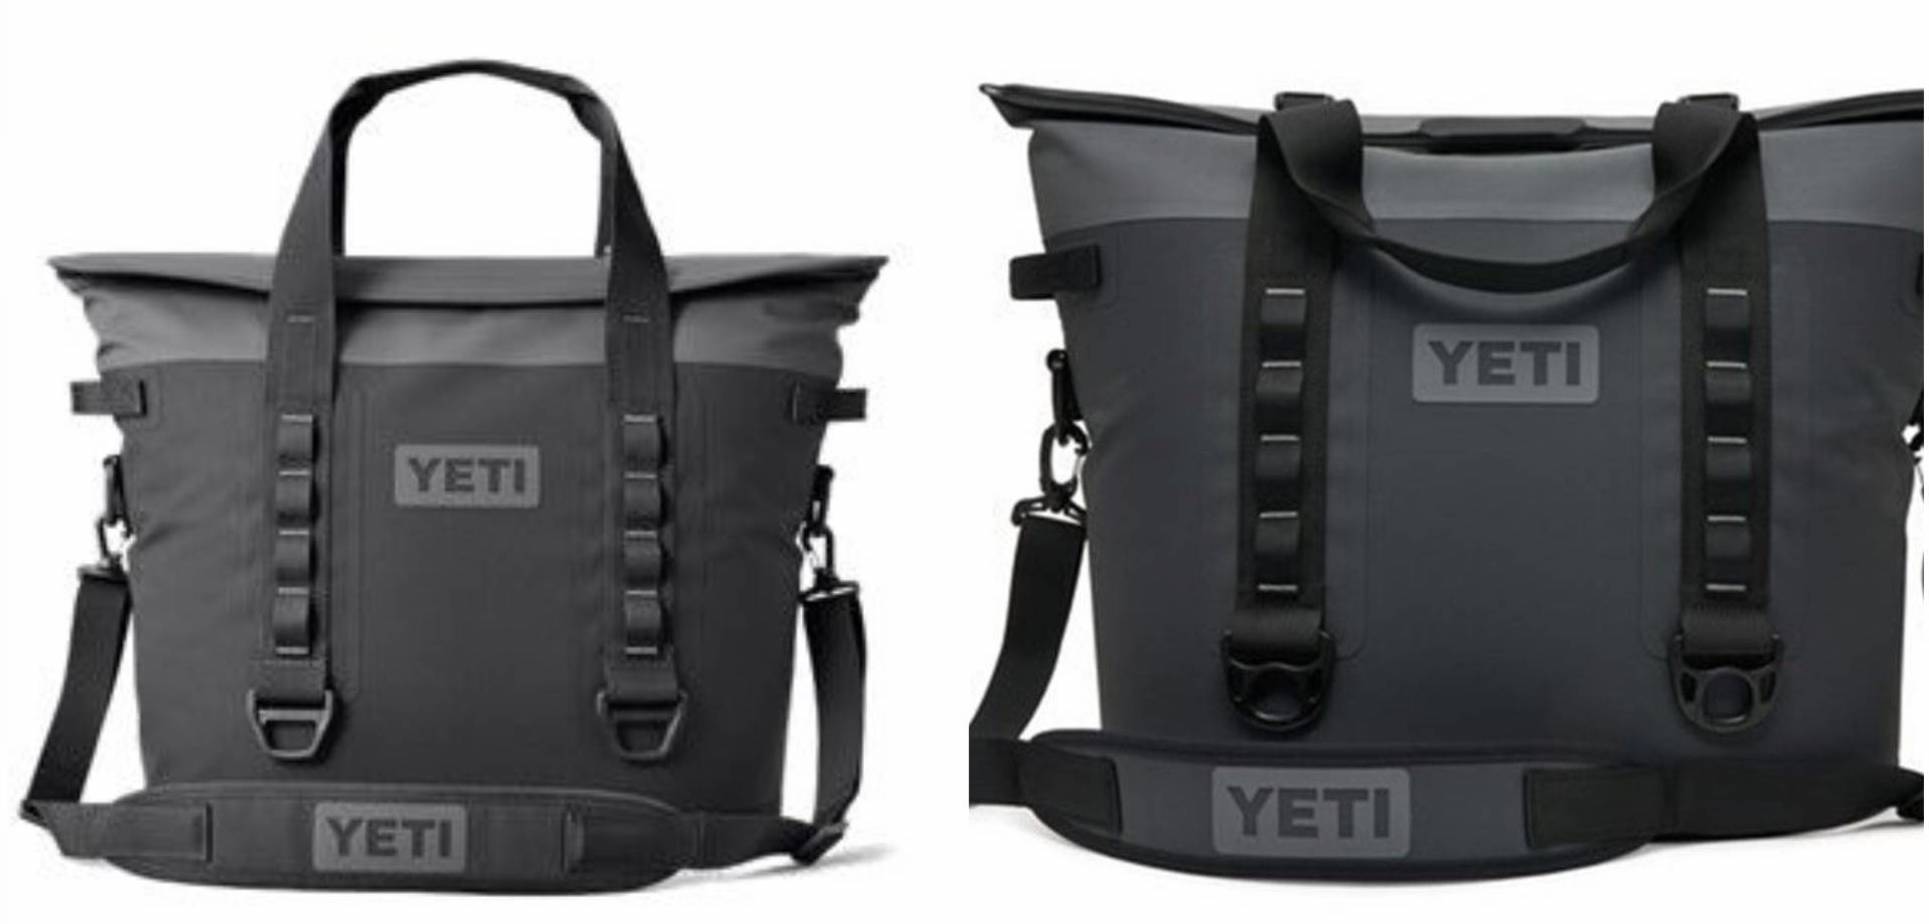 Maiden Voyage of our Yeti Hopper M30 Soft Cooler — Half Past First